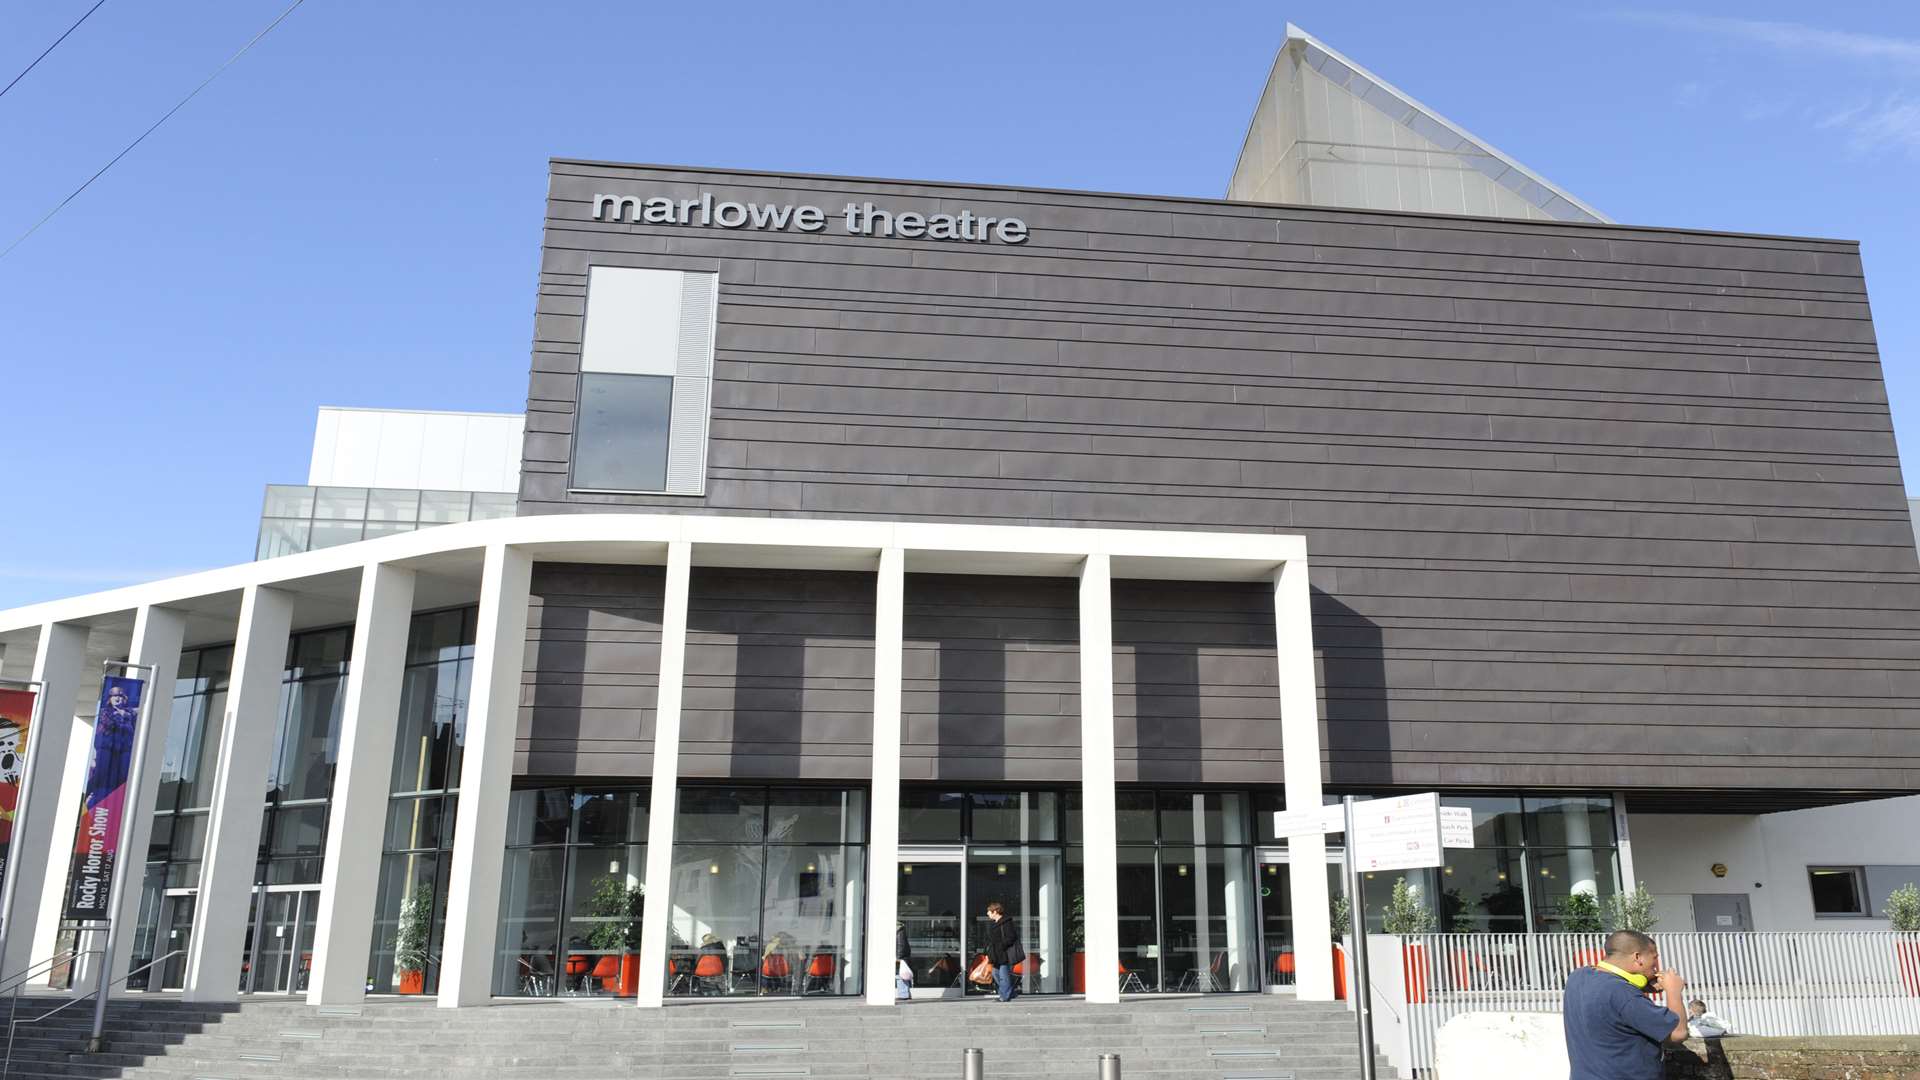 Stephen Belsey was a chef at the Marlowe Theatre in Canterbury